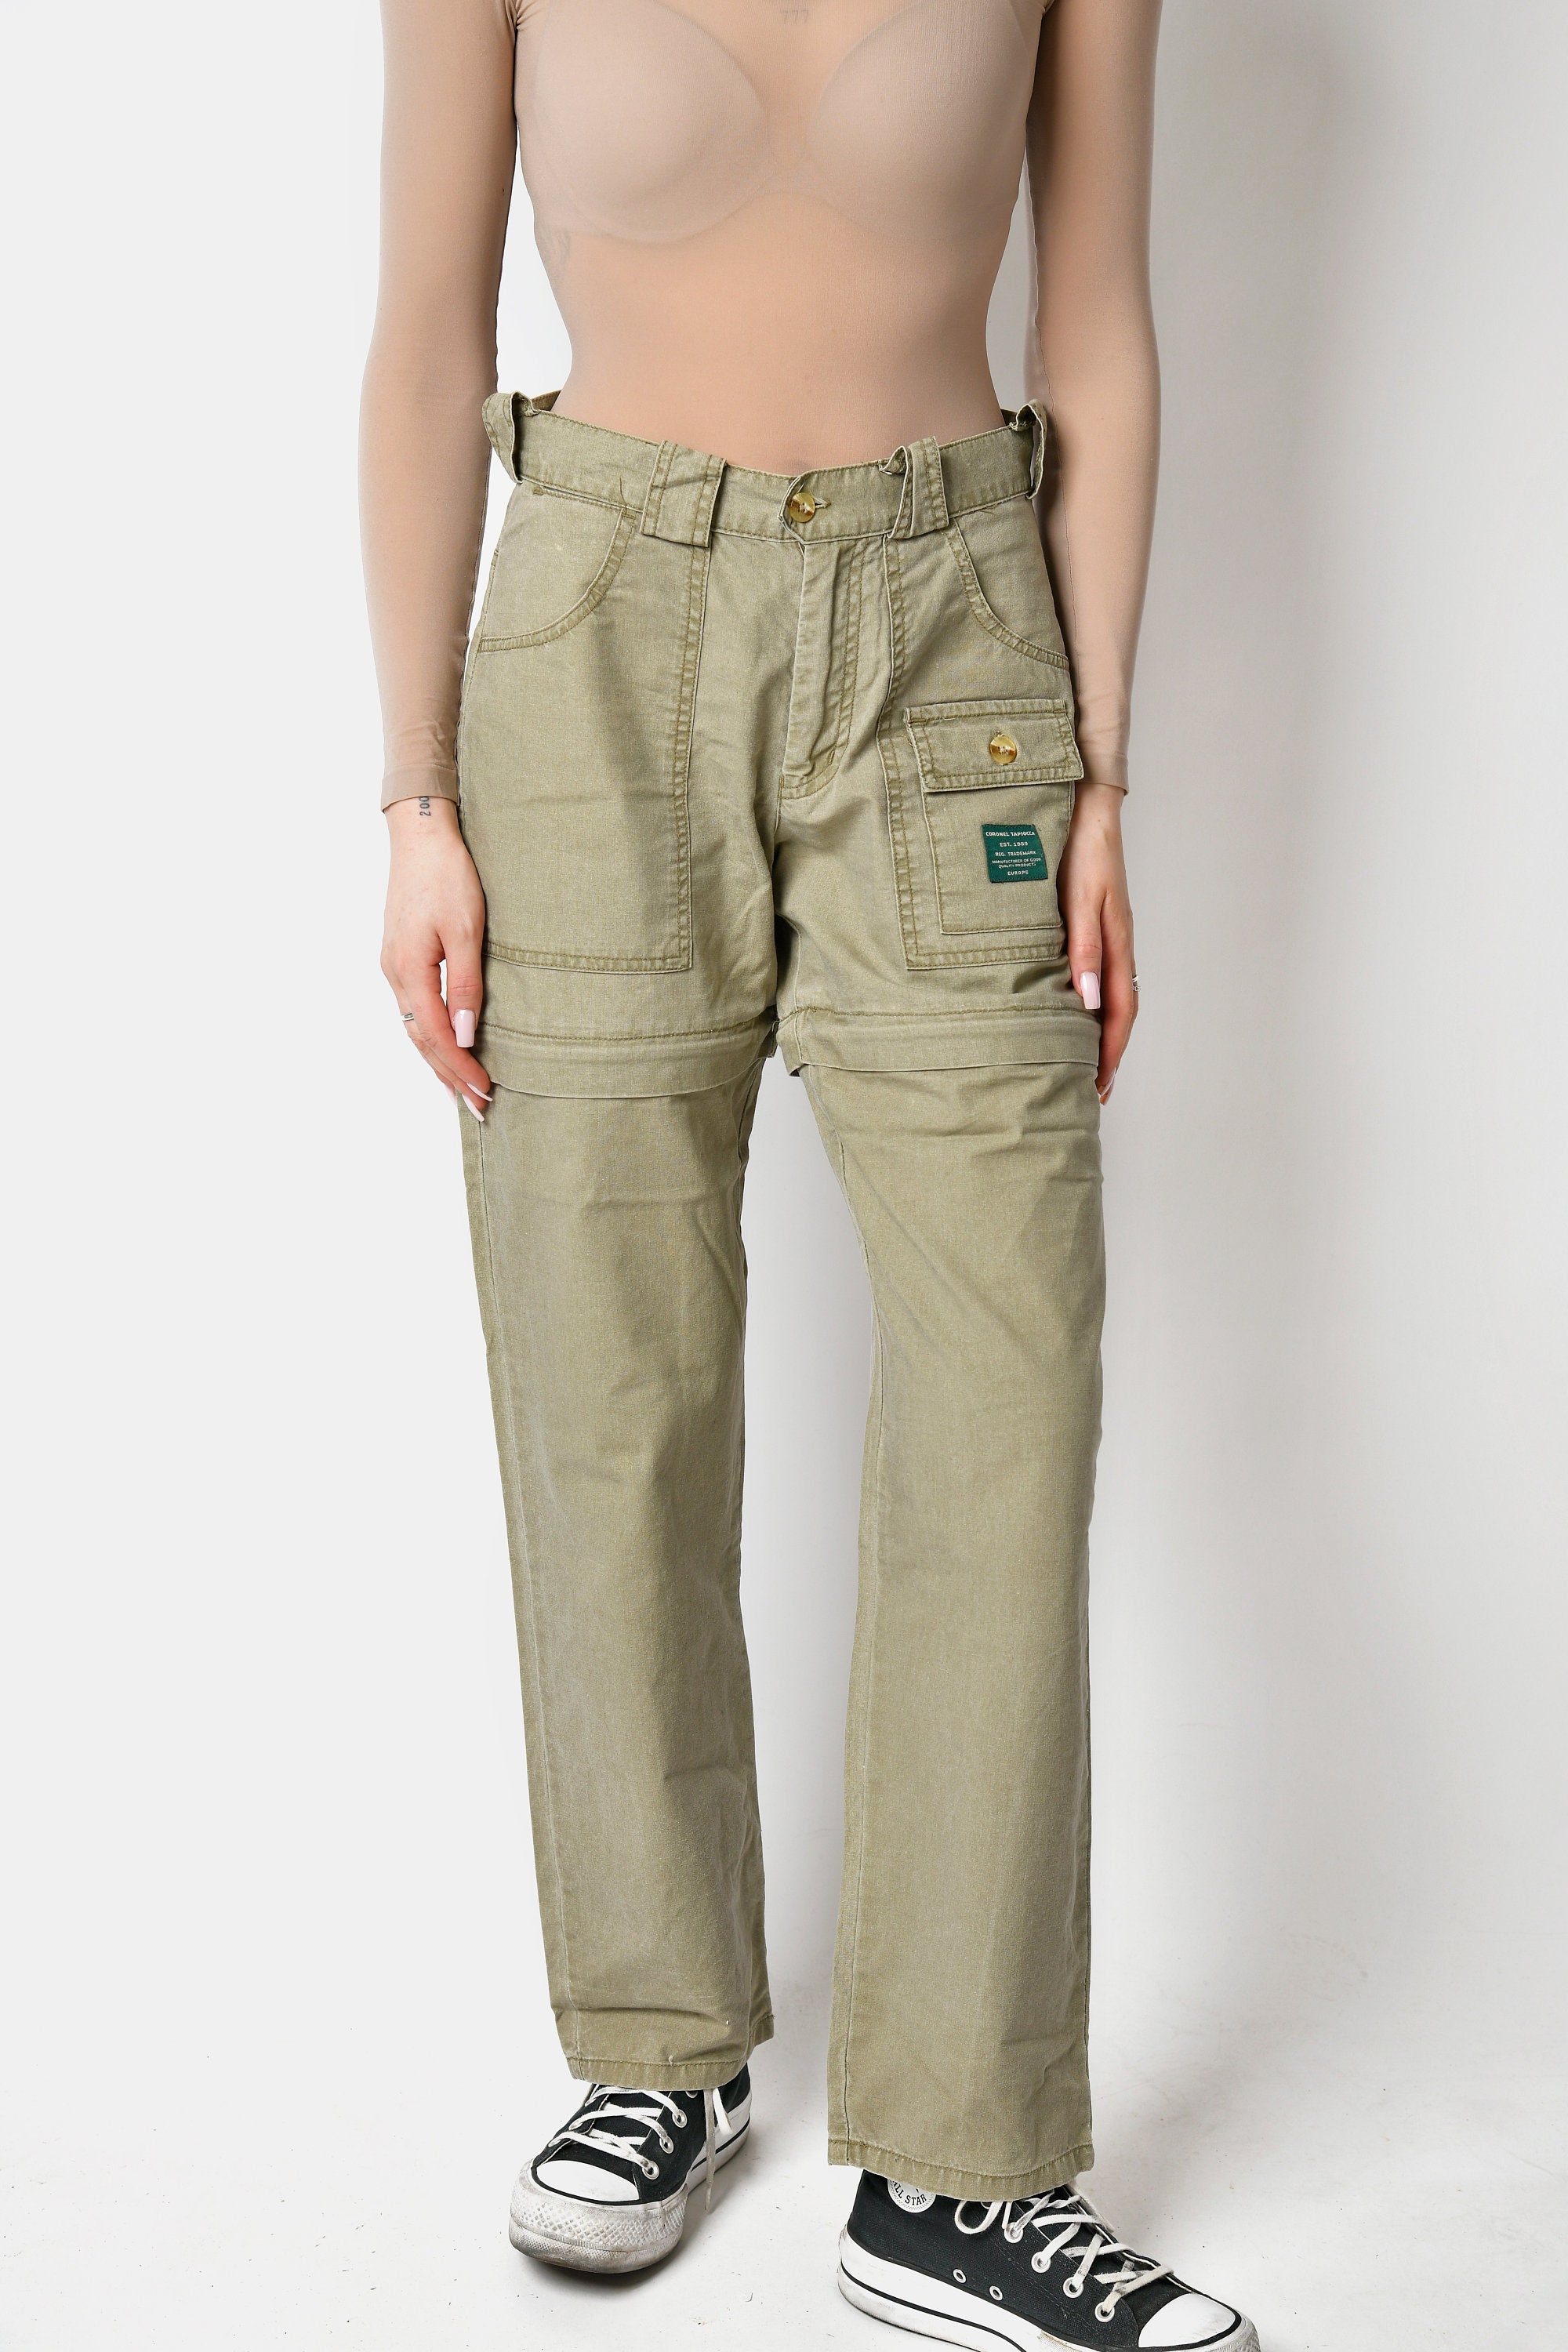 Buy Hiking Pants Online In India -  India